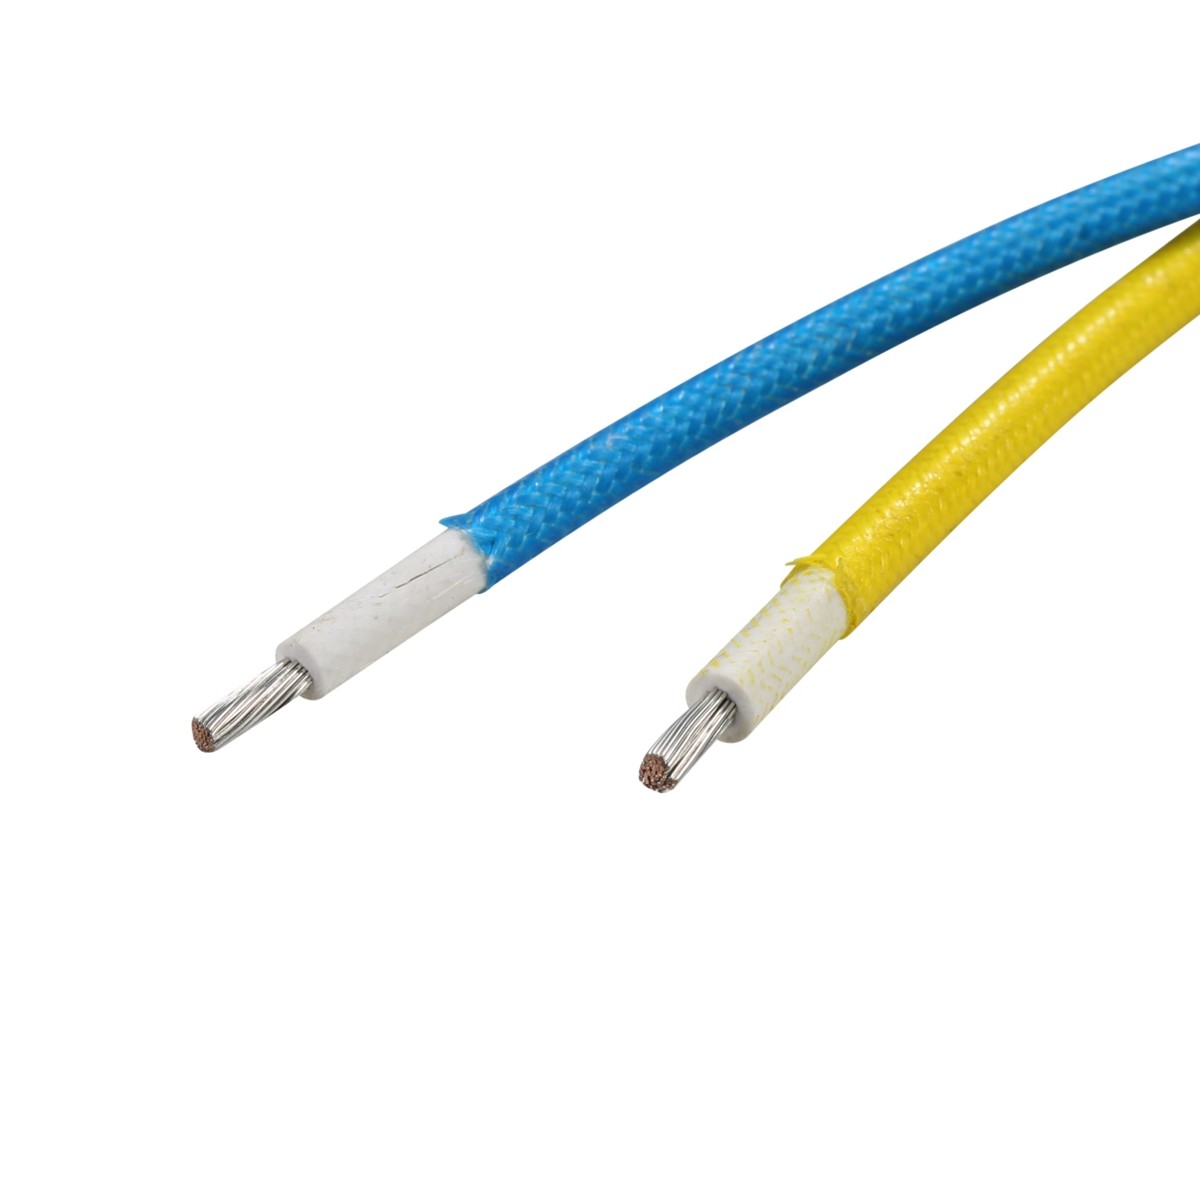 China Fiberglass Braided Electrical Cable silicone insulation wire Heat Proof for sale